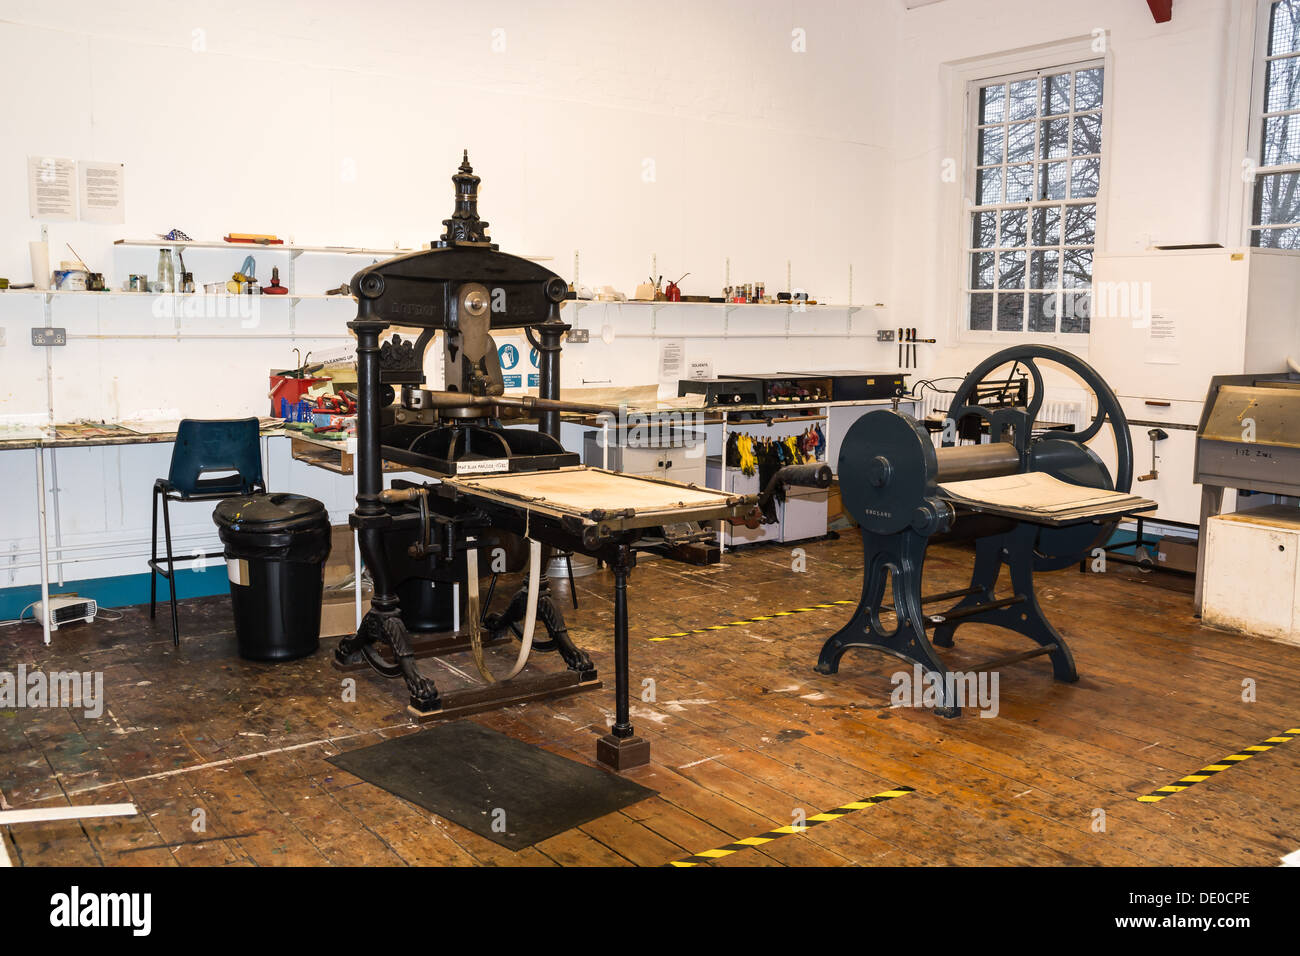 A printing workshop in a art college Stock Photo